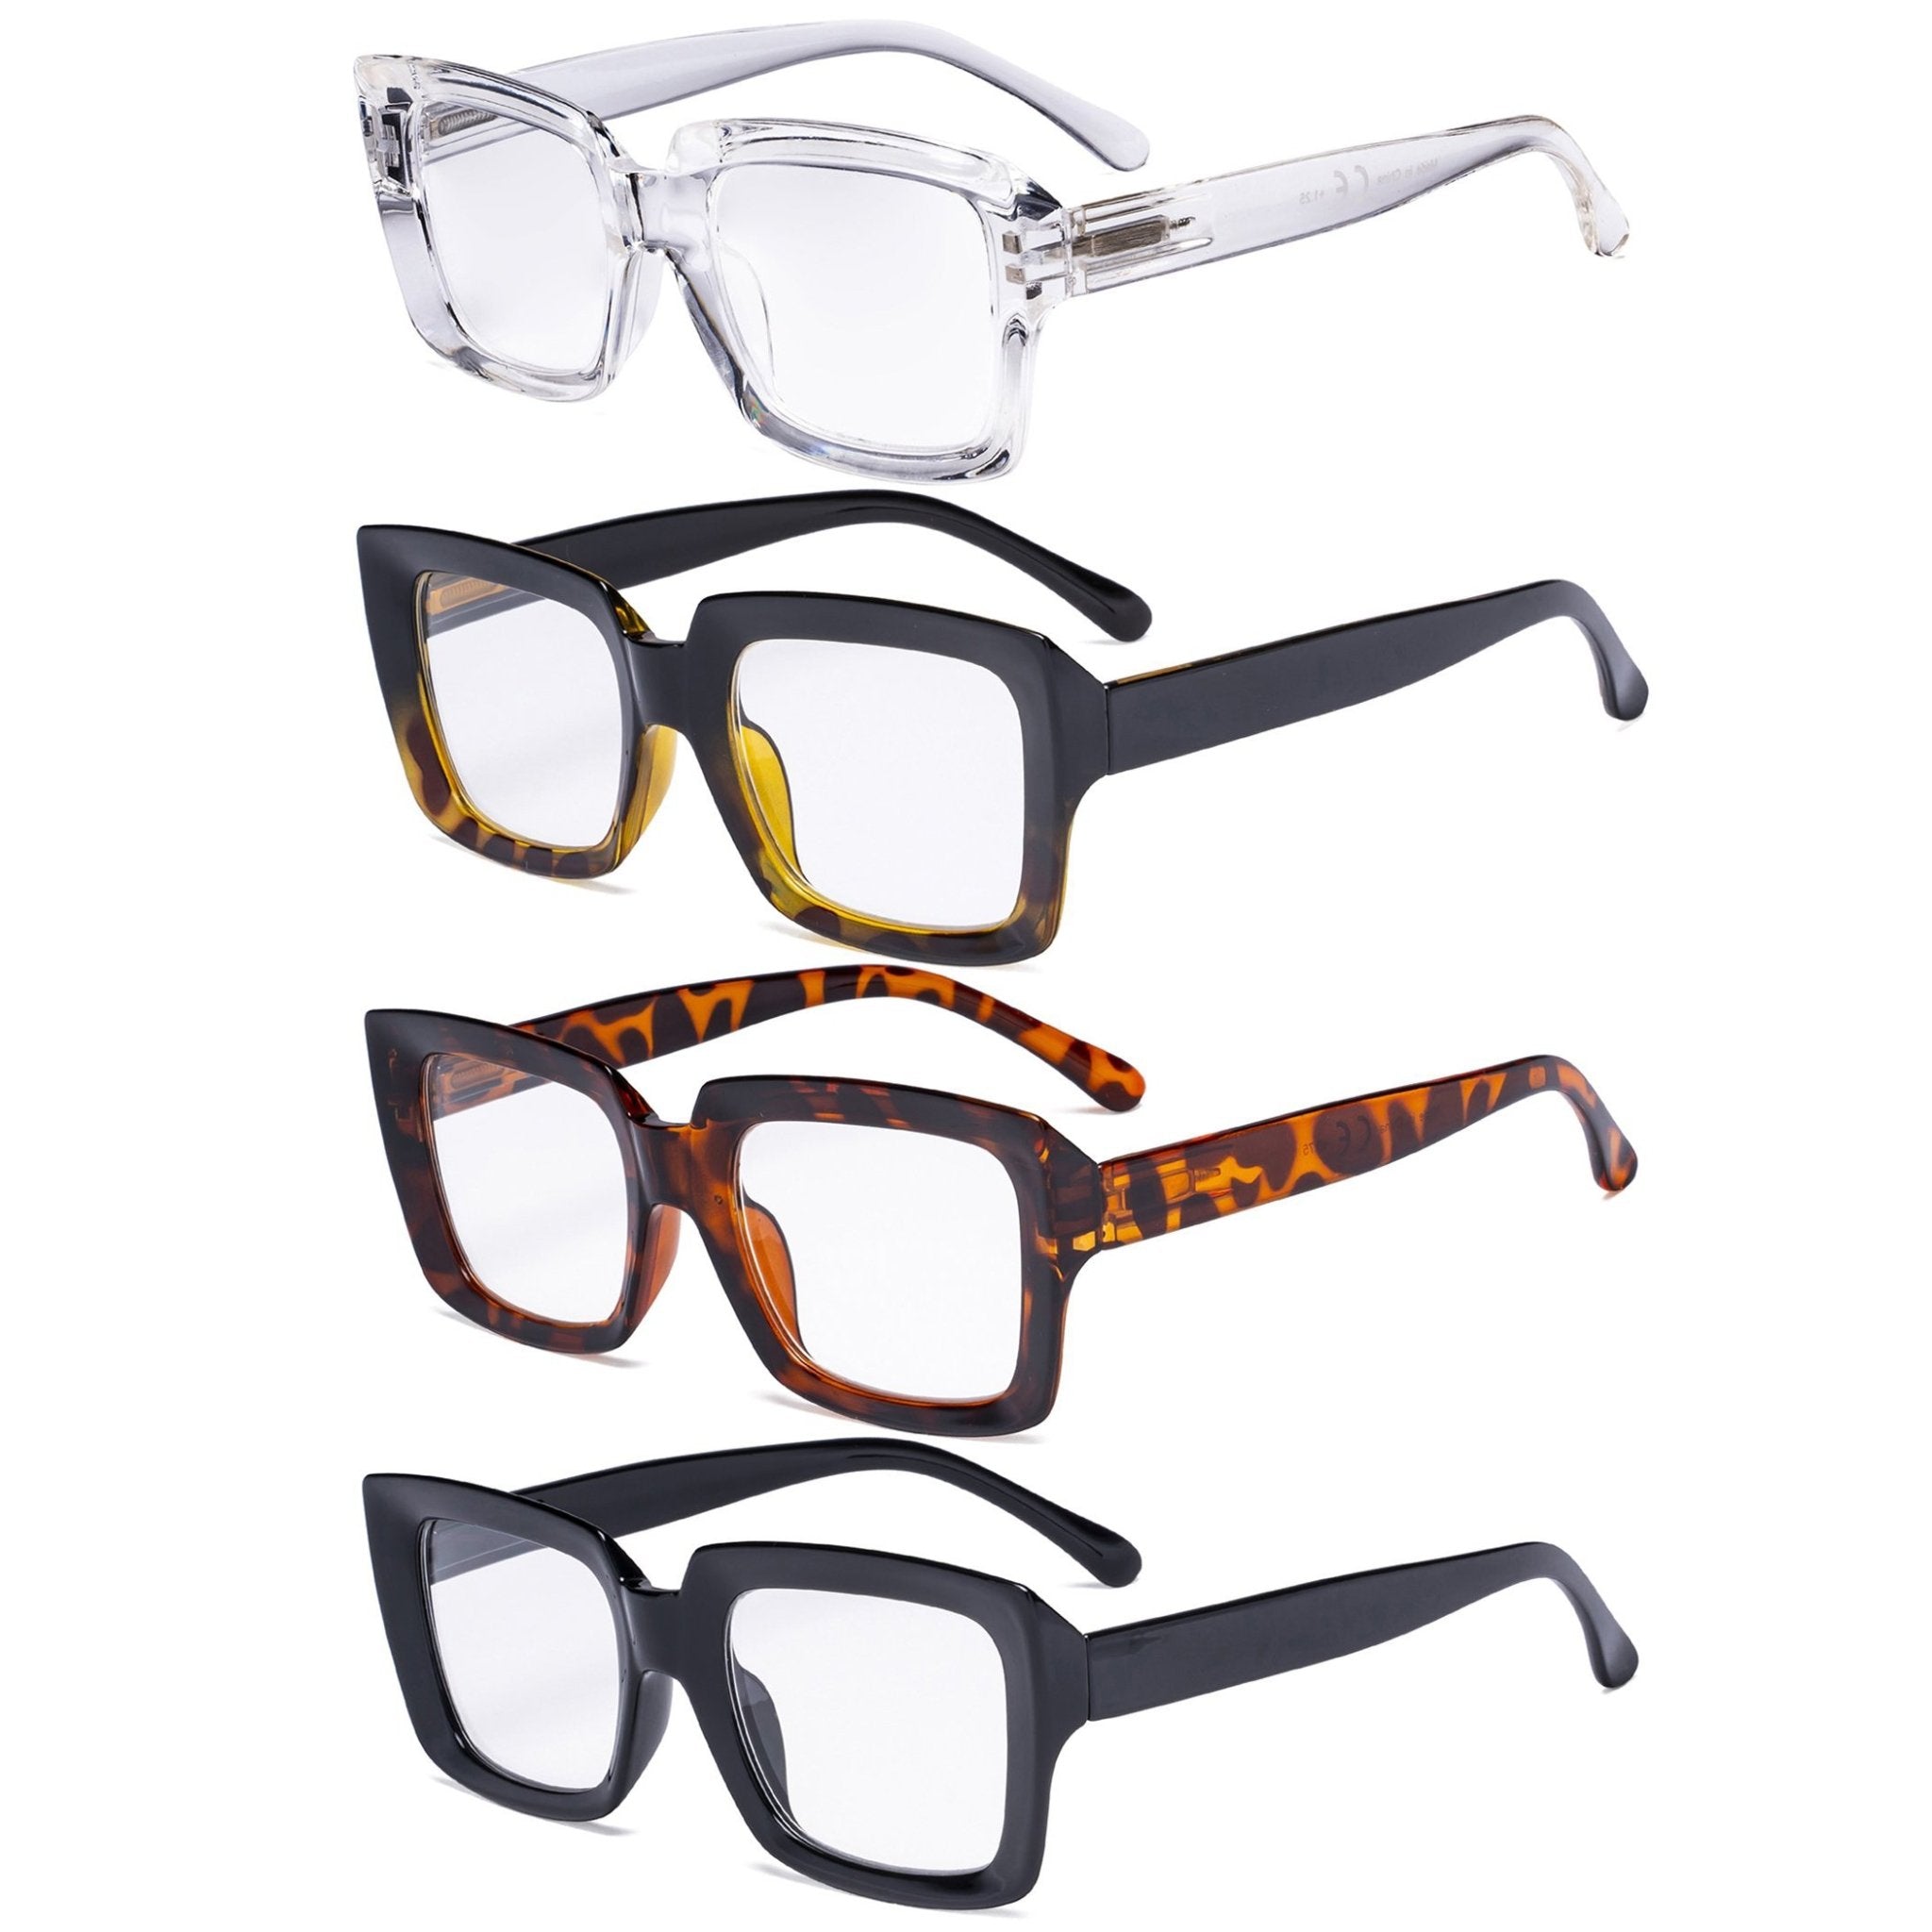 4-pack-ladies-reading-glasses-stylish-oversized-square-readers